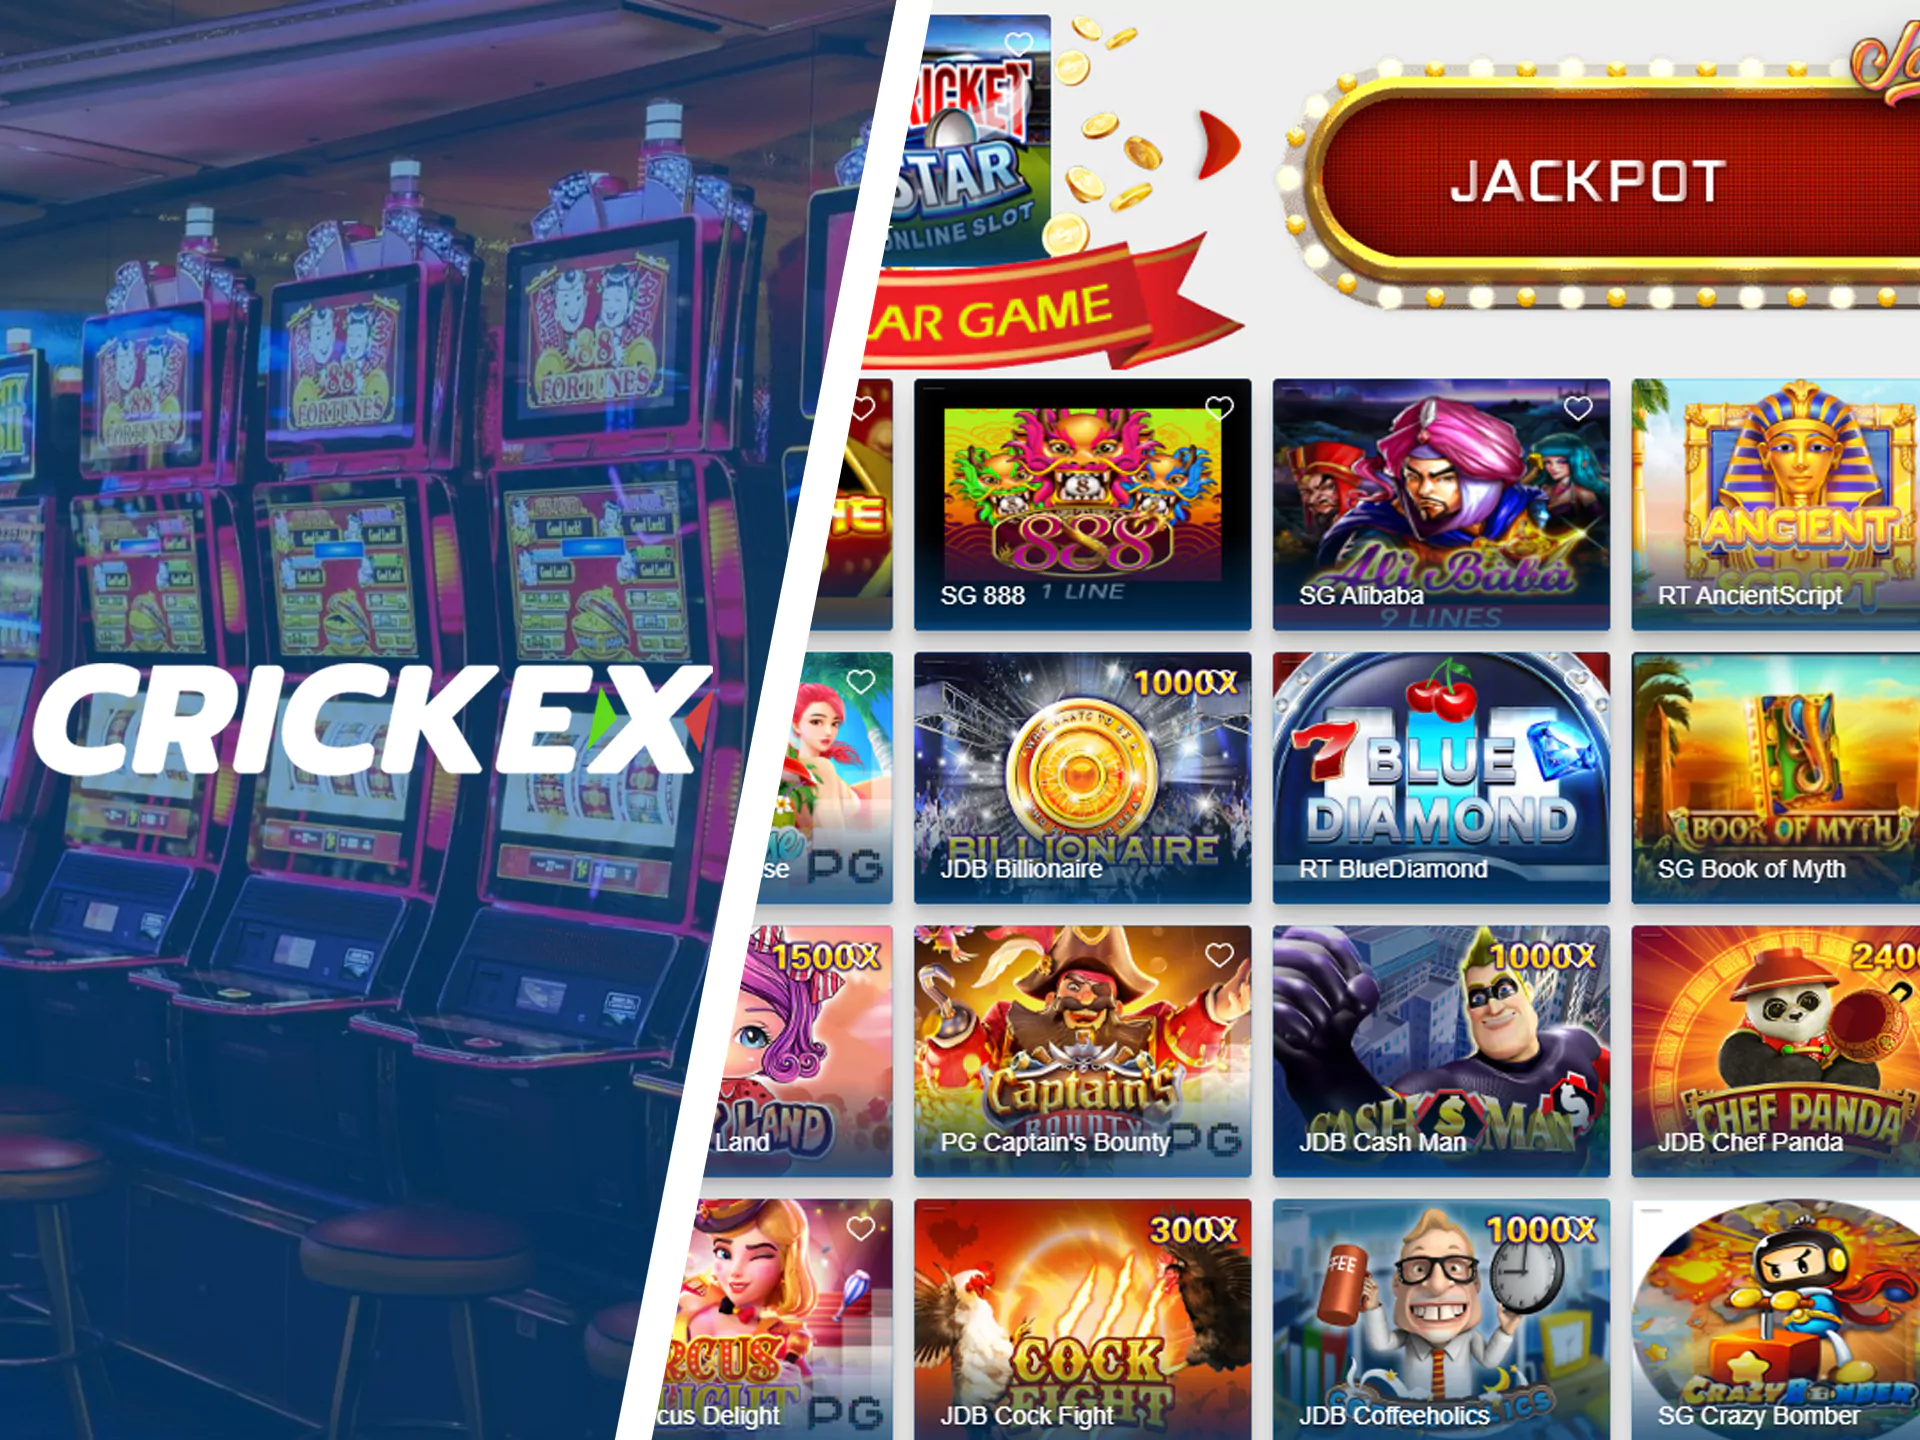 Play Crickex slots for fun and enrichment.